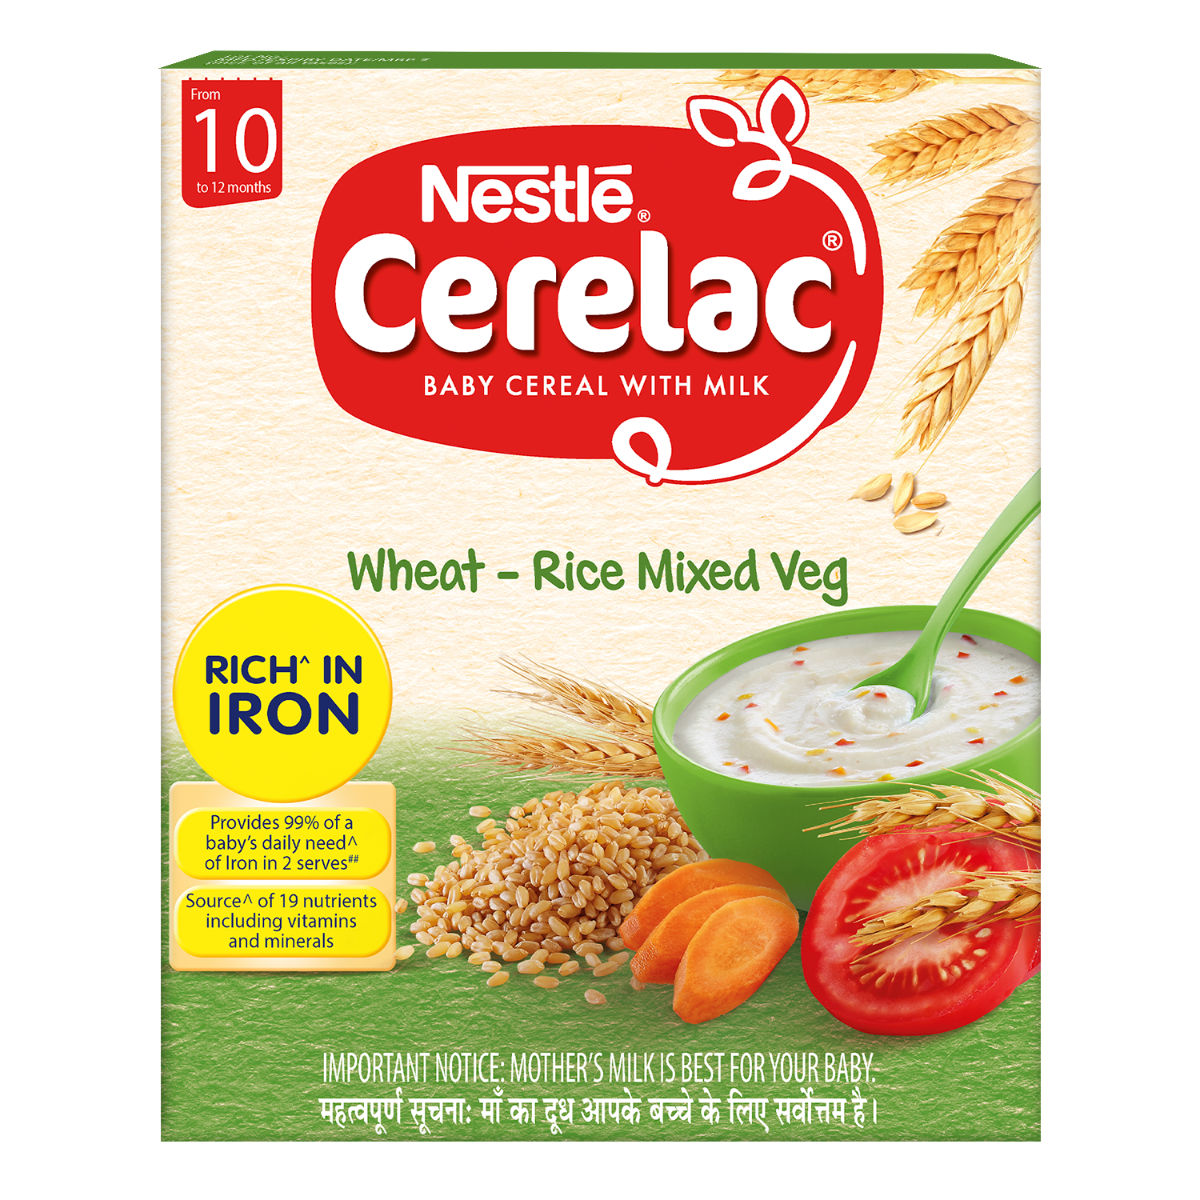 Nestle Cerelac Wheat Rice Mixed Veg Baby Cereal, 10 to 12 Months, Stage 3, 300 gm Refill Pack, Pack of 1 